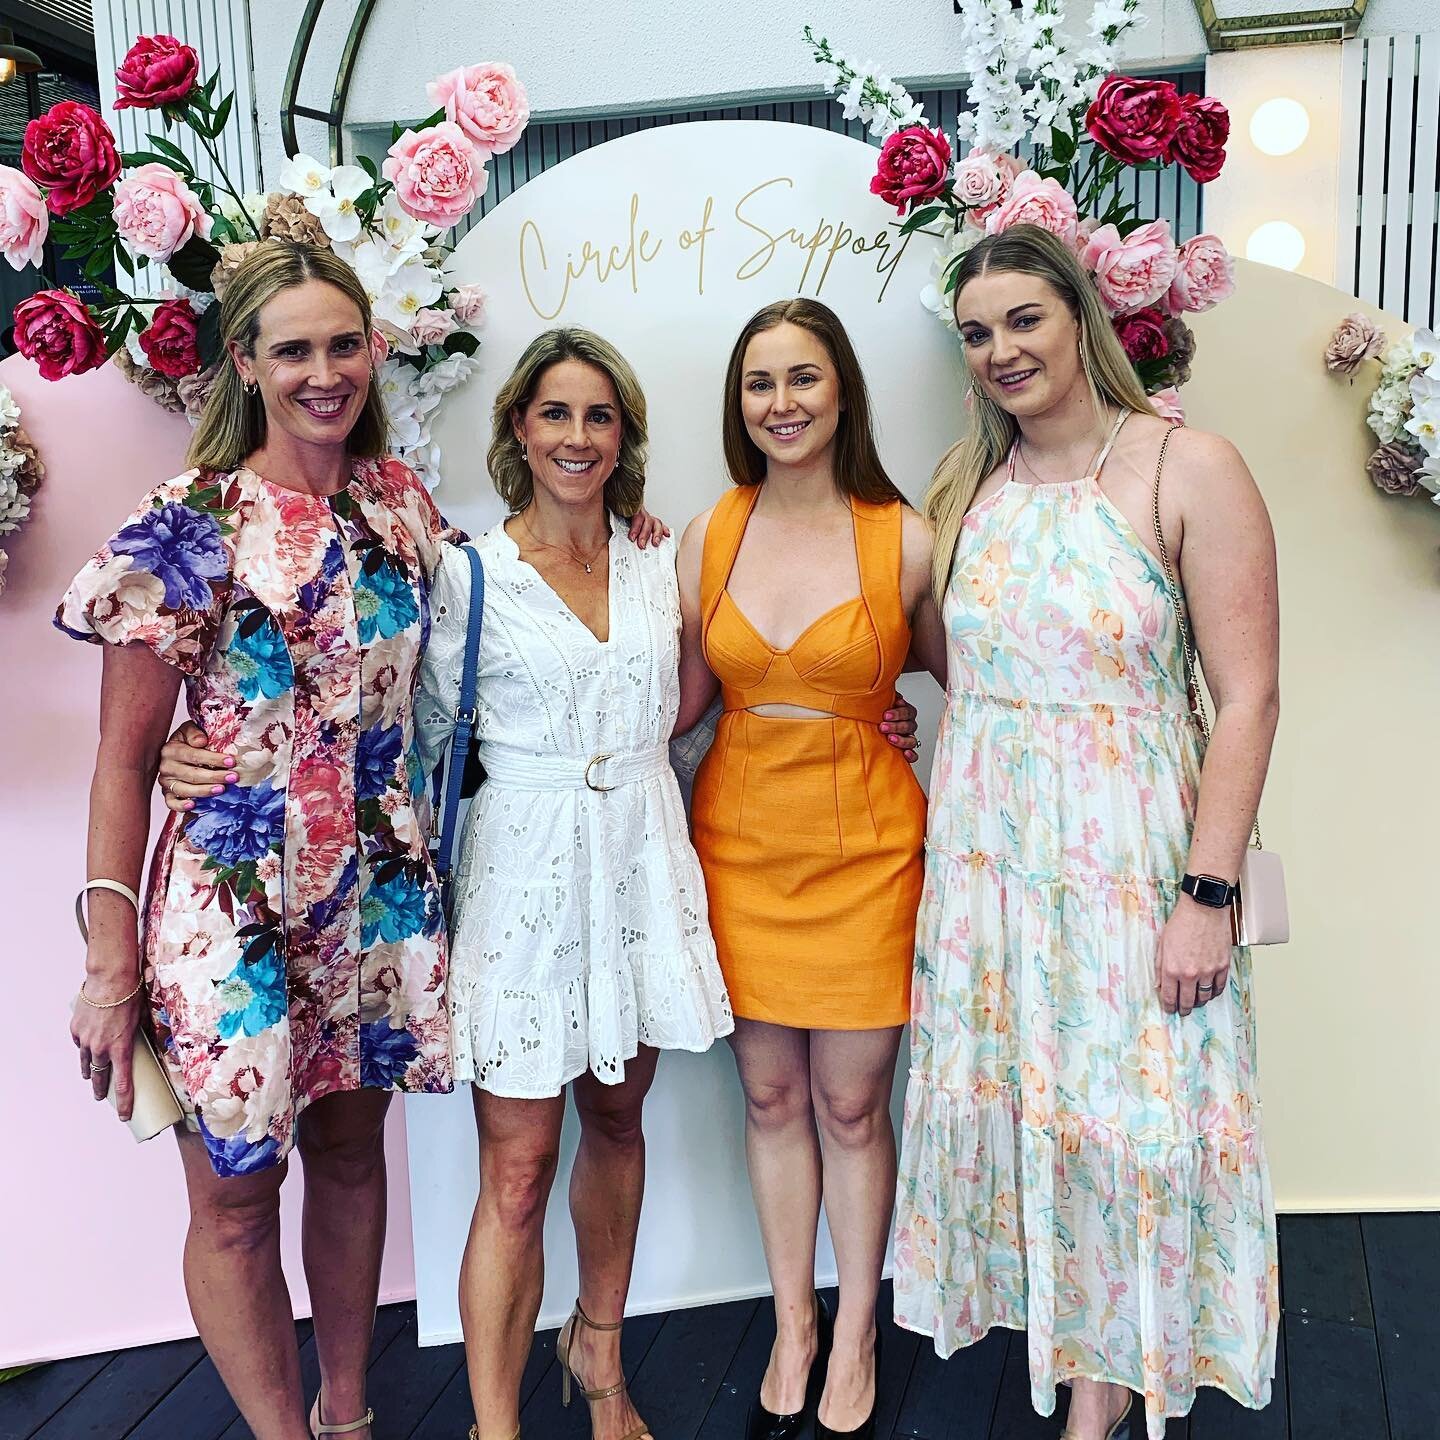 Spending time with my incredible team while fundraising for a noteworthy cause is unmatched. A huge shoutout to the Pink Elephants charity lunch and Dr. Drew Moffrey for hosting the annual event. Supporting wonderful causes and creating memorable mom